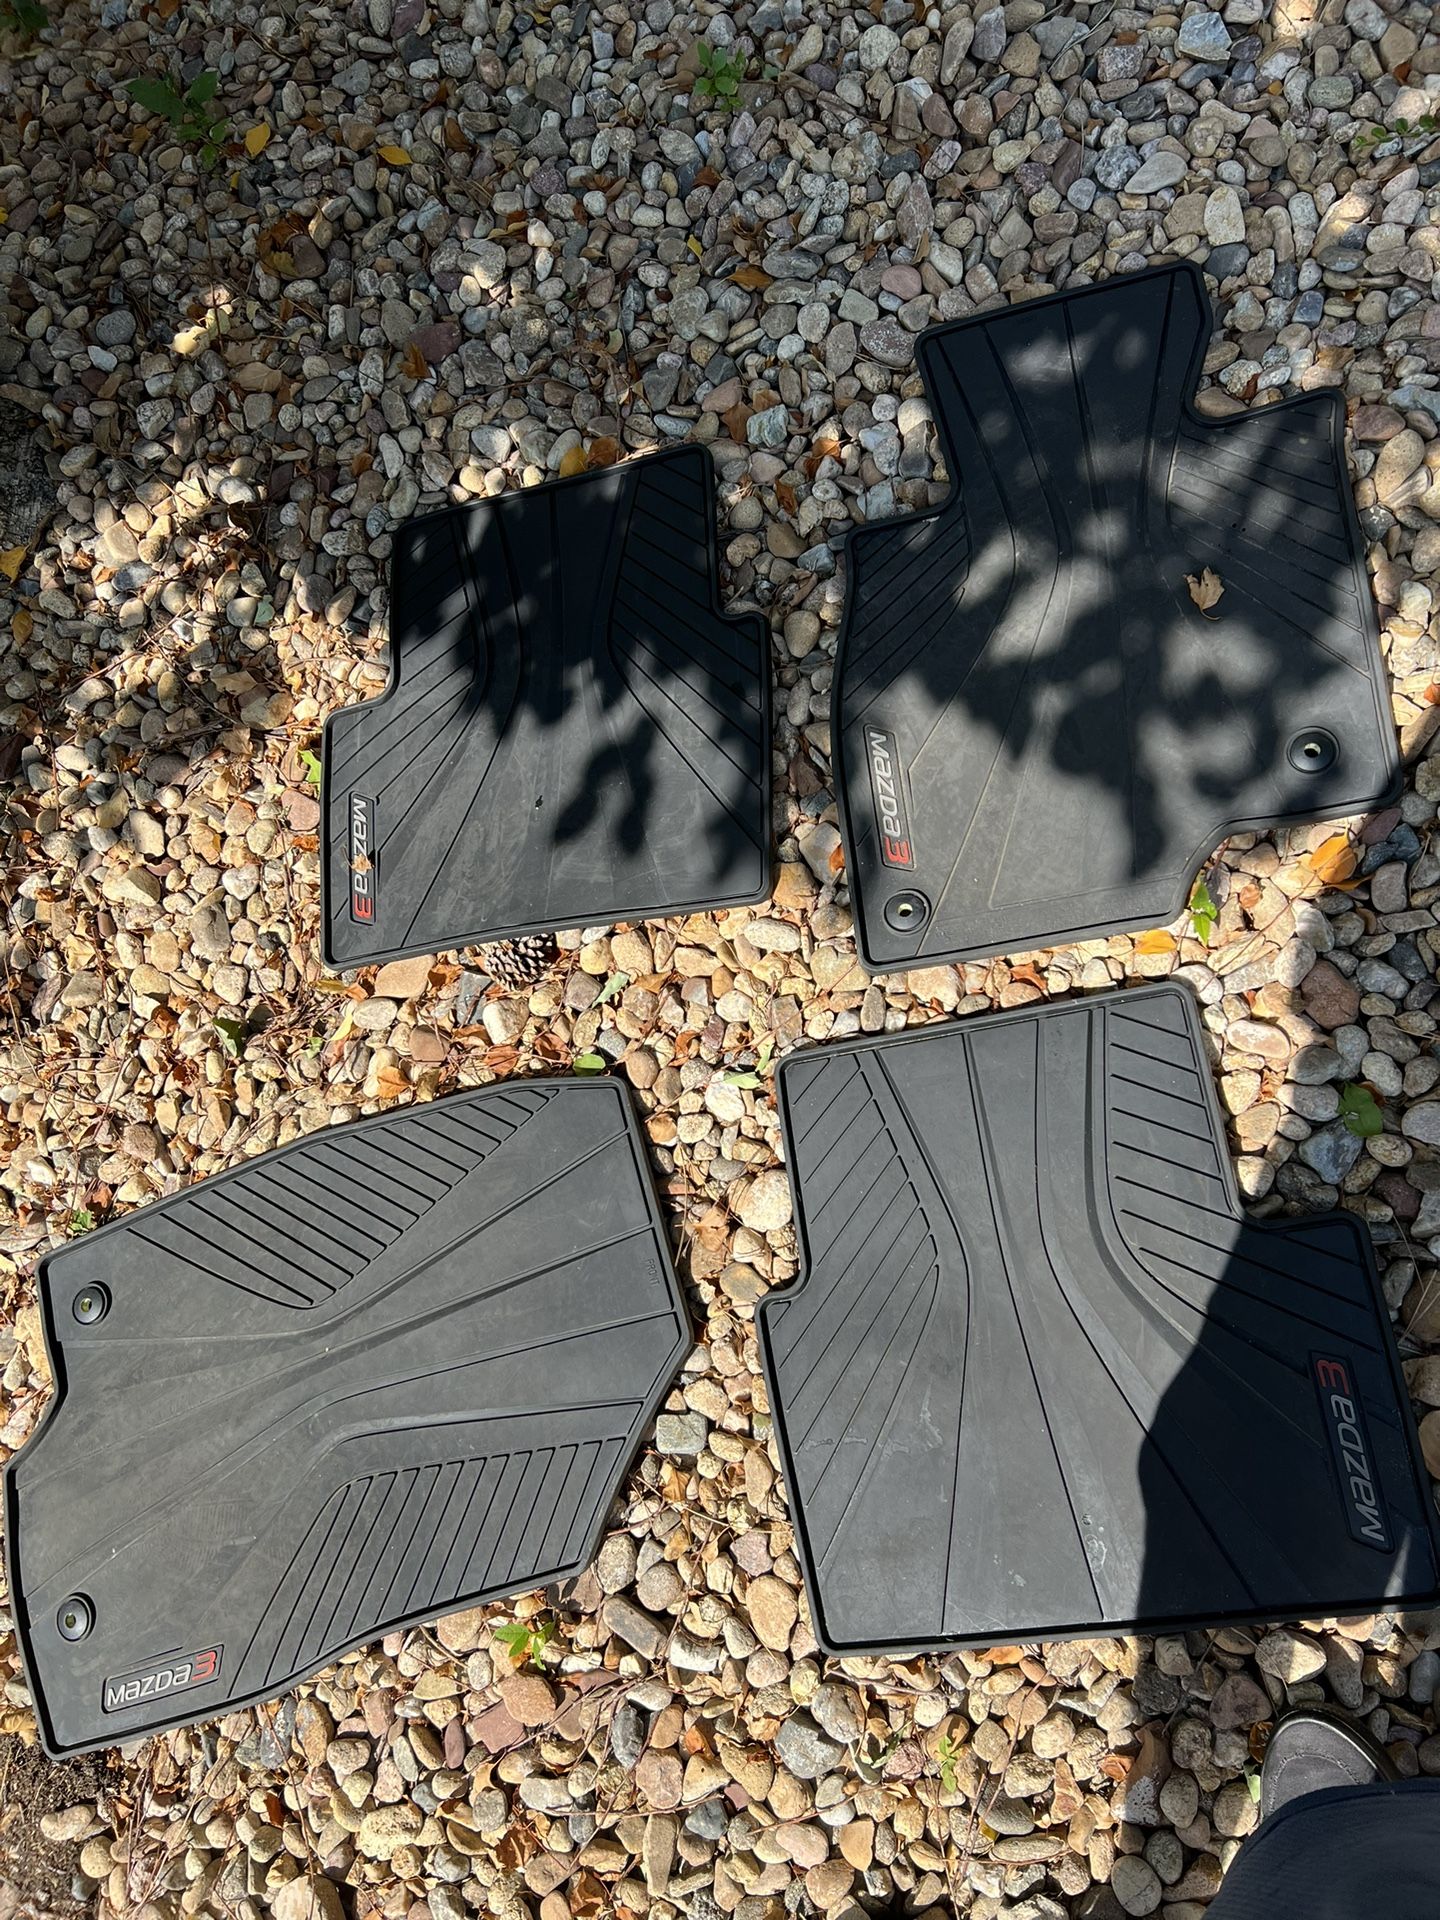 2018 Mazda 3 All Weather Sport Mats